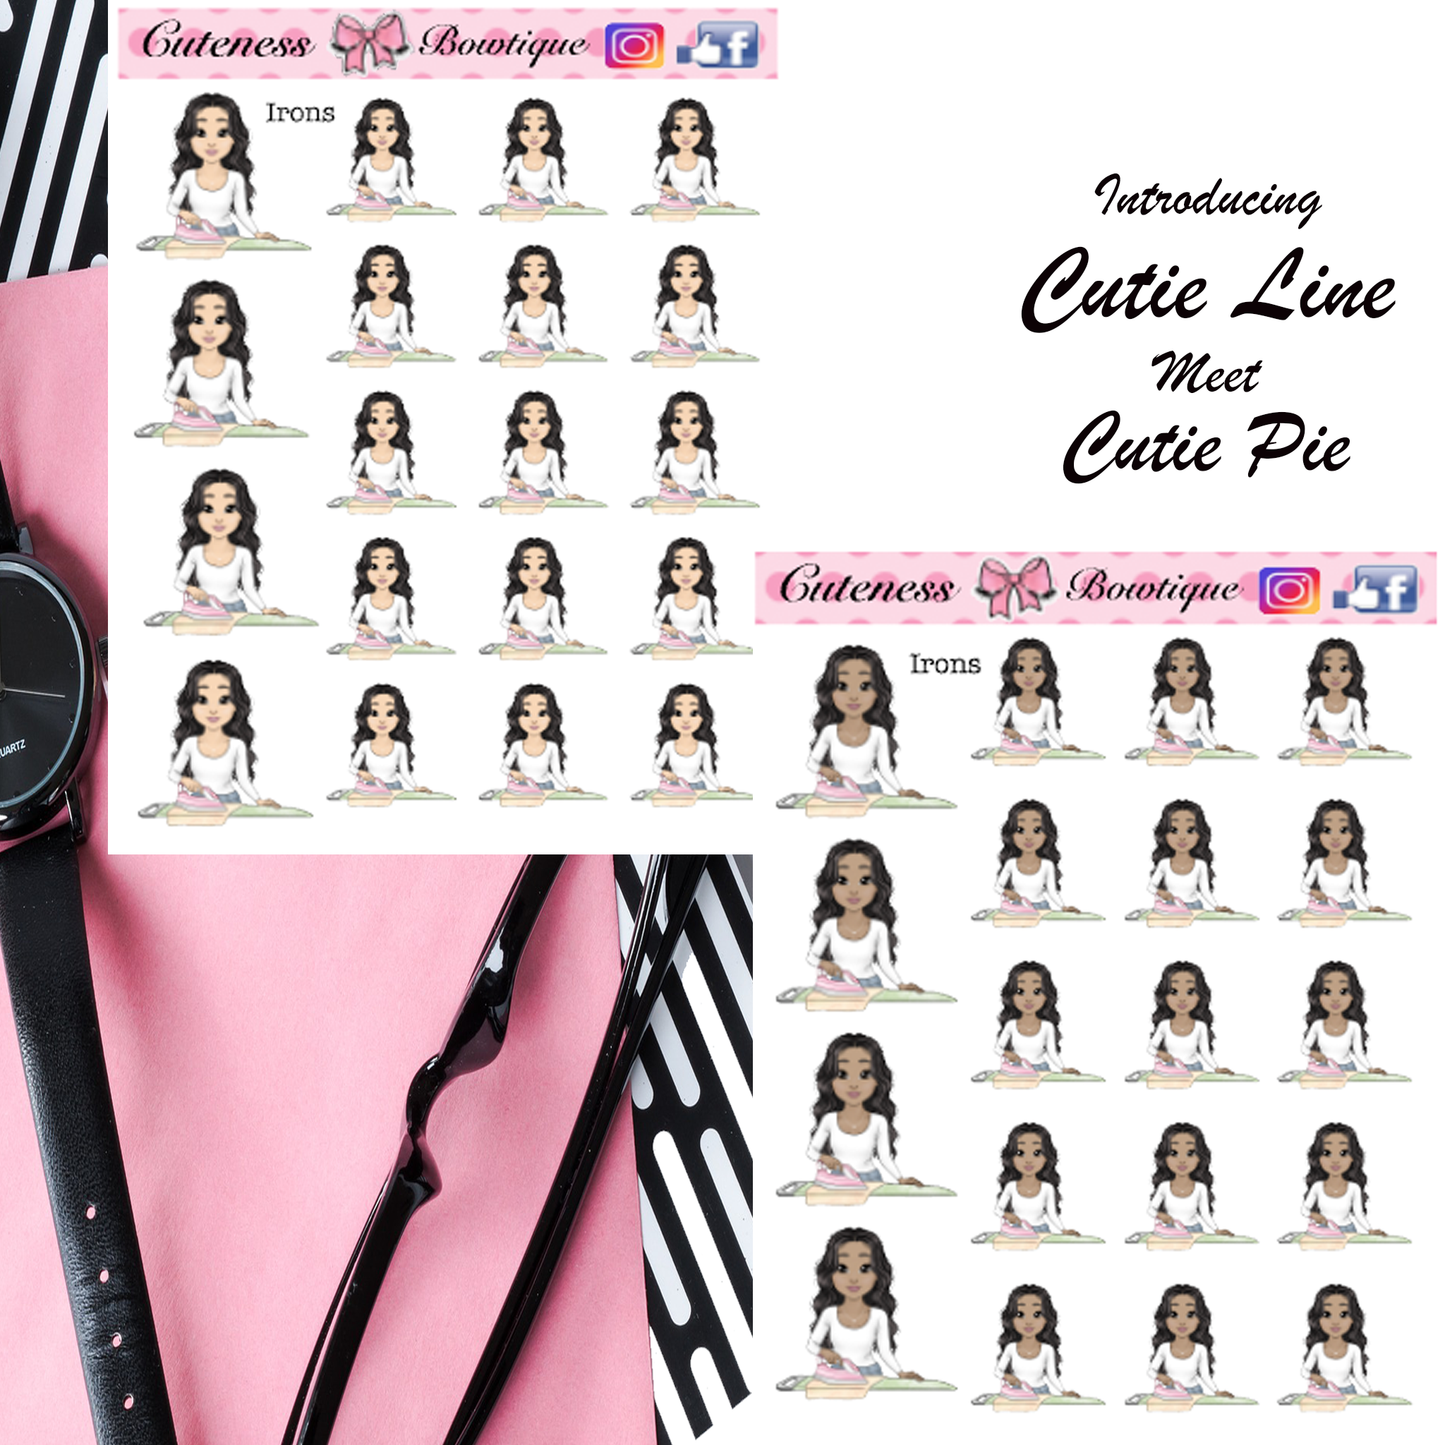 The Cutie Line Icon Sticker Sheet | Cuteness Planner Stickers for Agendas, Planners, Notebooks, Dividers | IRONS